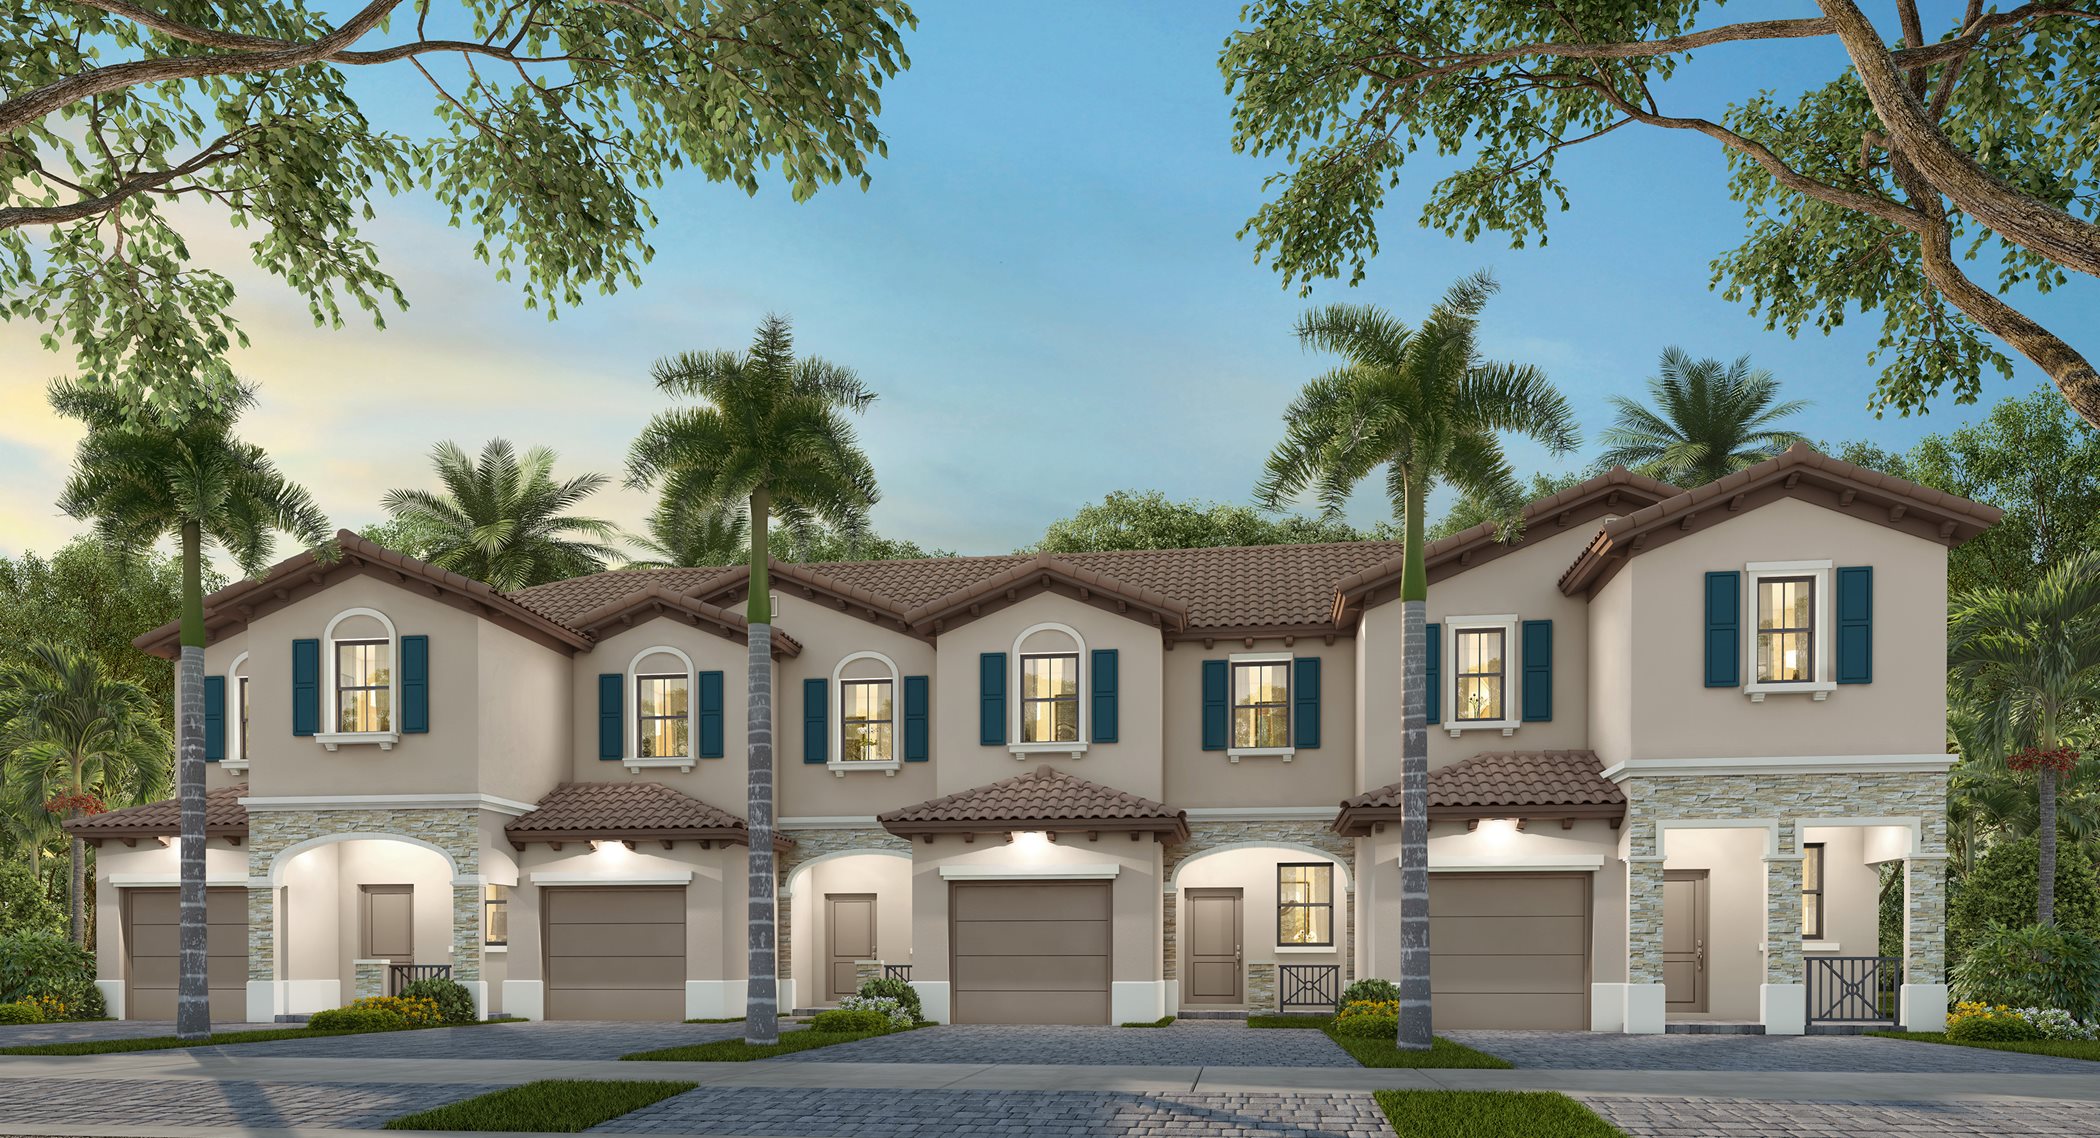 Spanish exterior rendering of townhome building